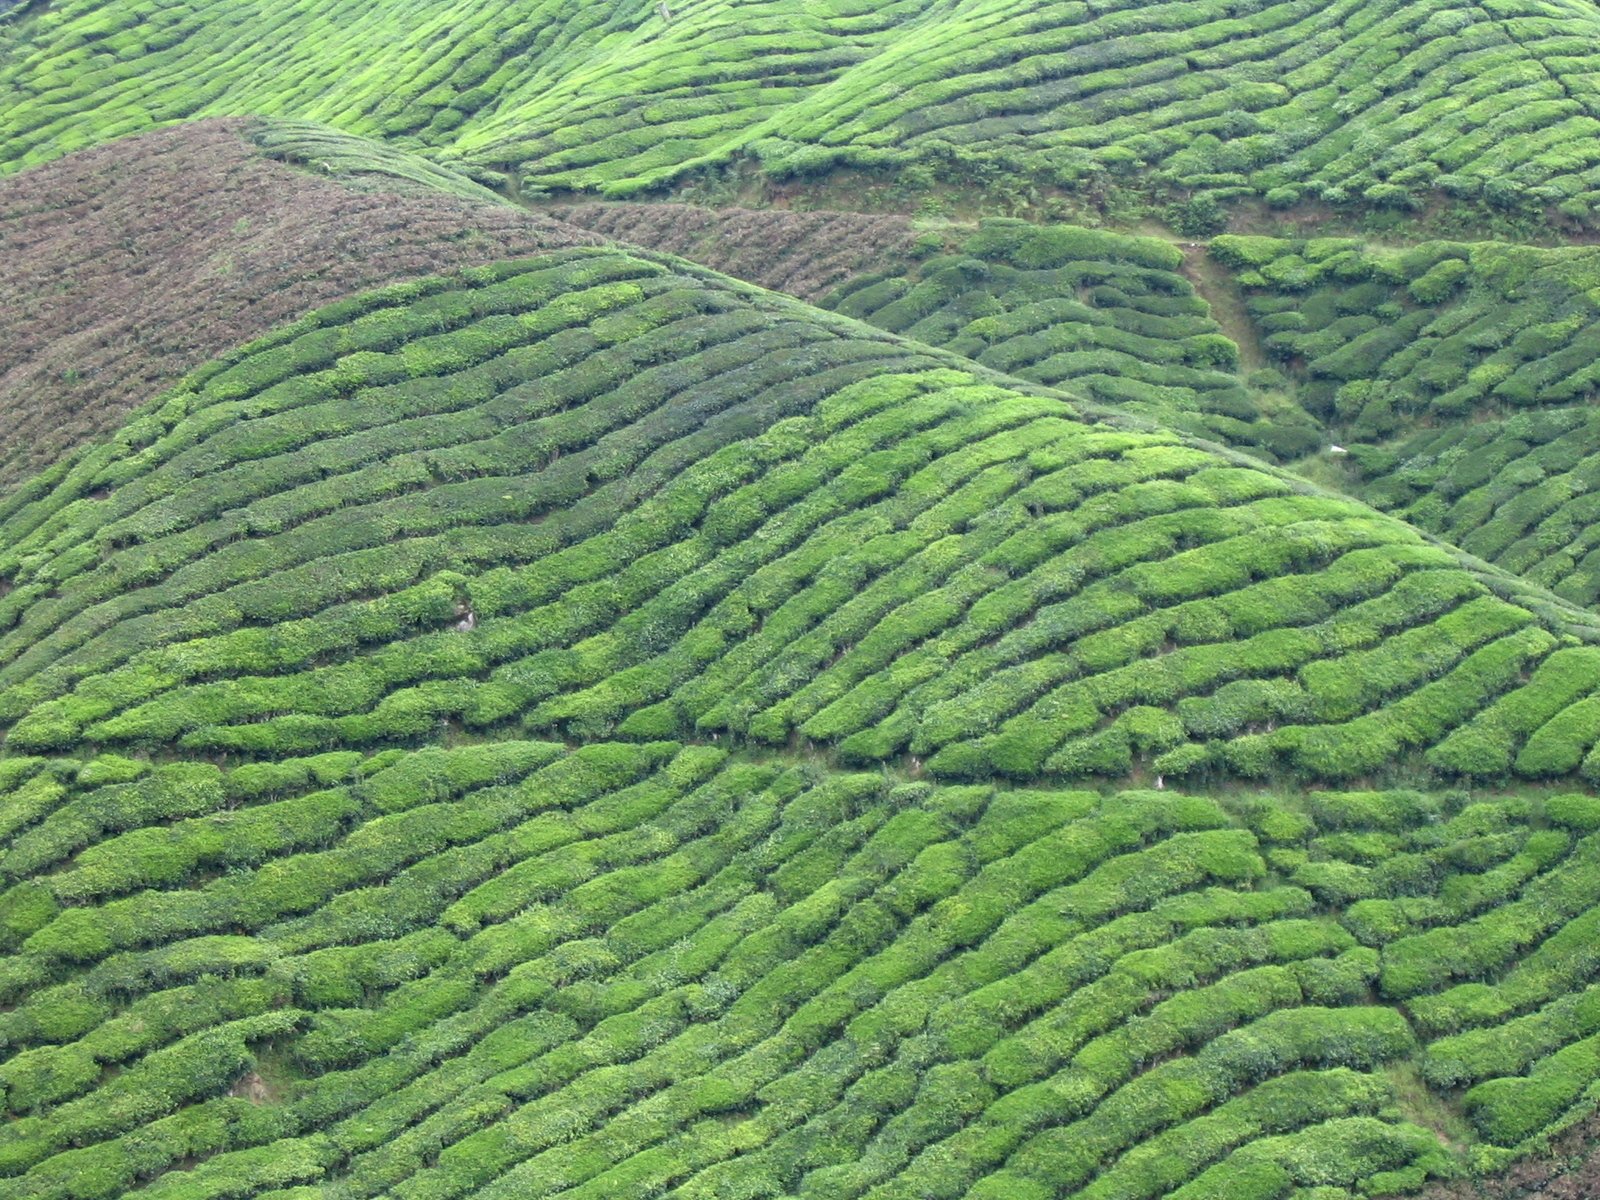 the mountains are filled with rows of tea bushes